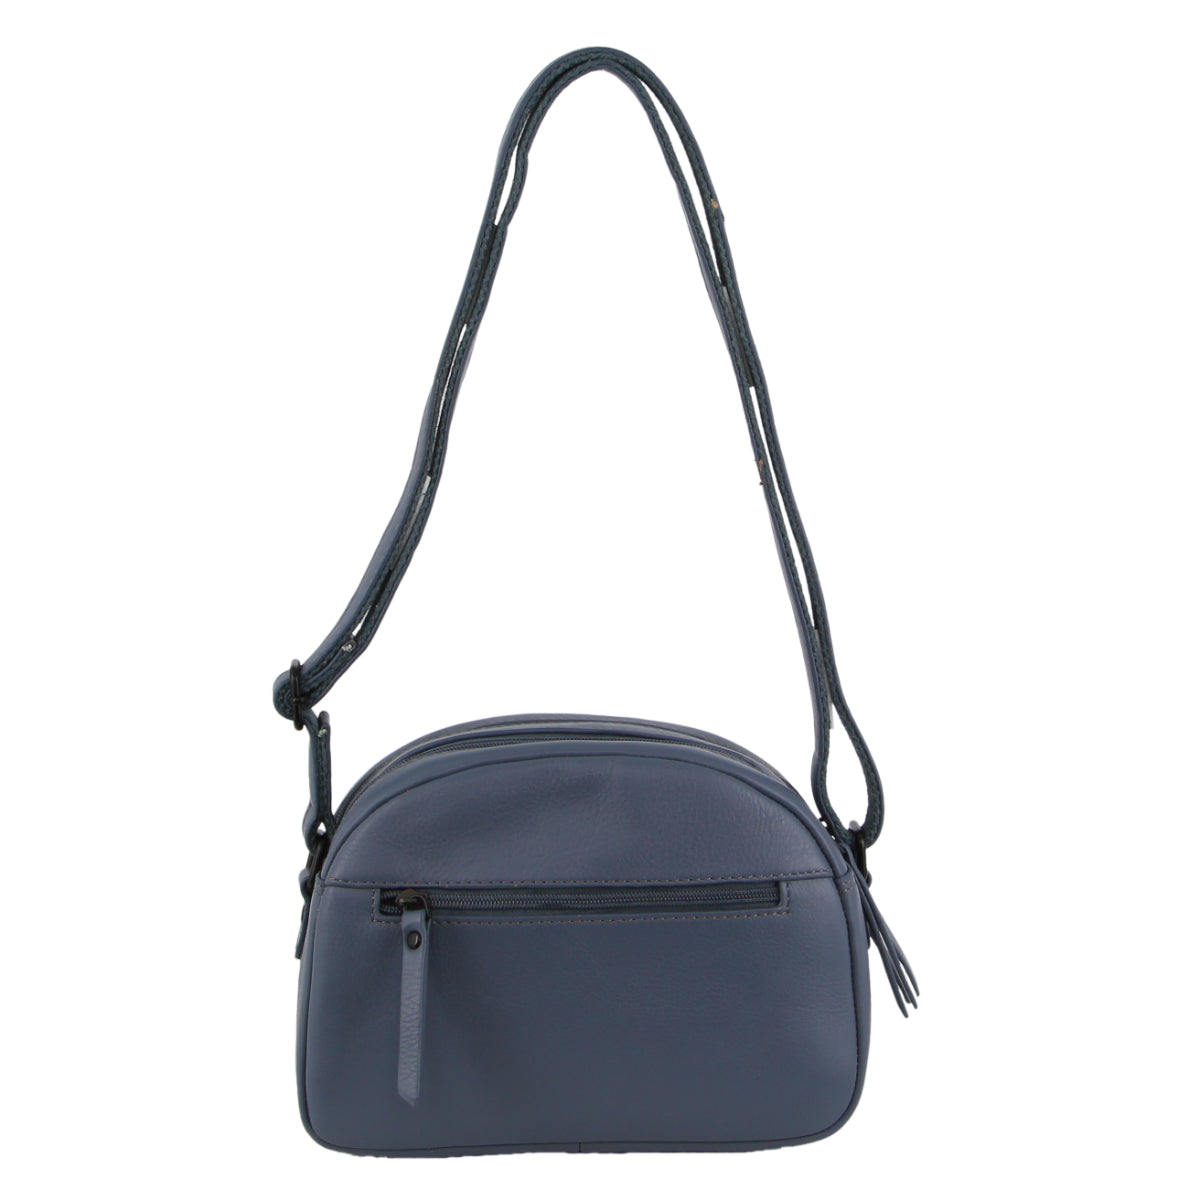 Milleni - NL3869 Small rounded leather sidebag - Teal